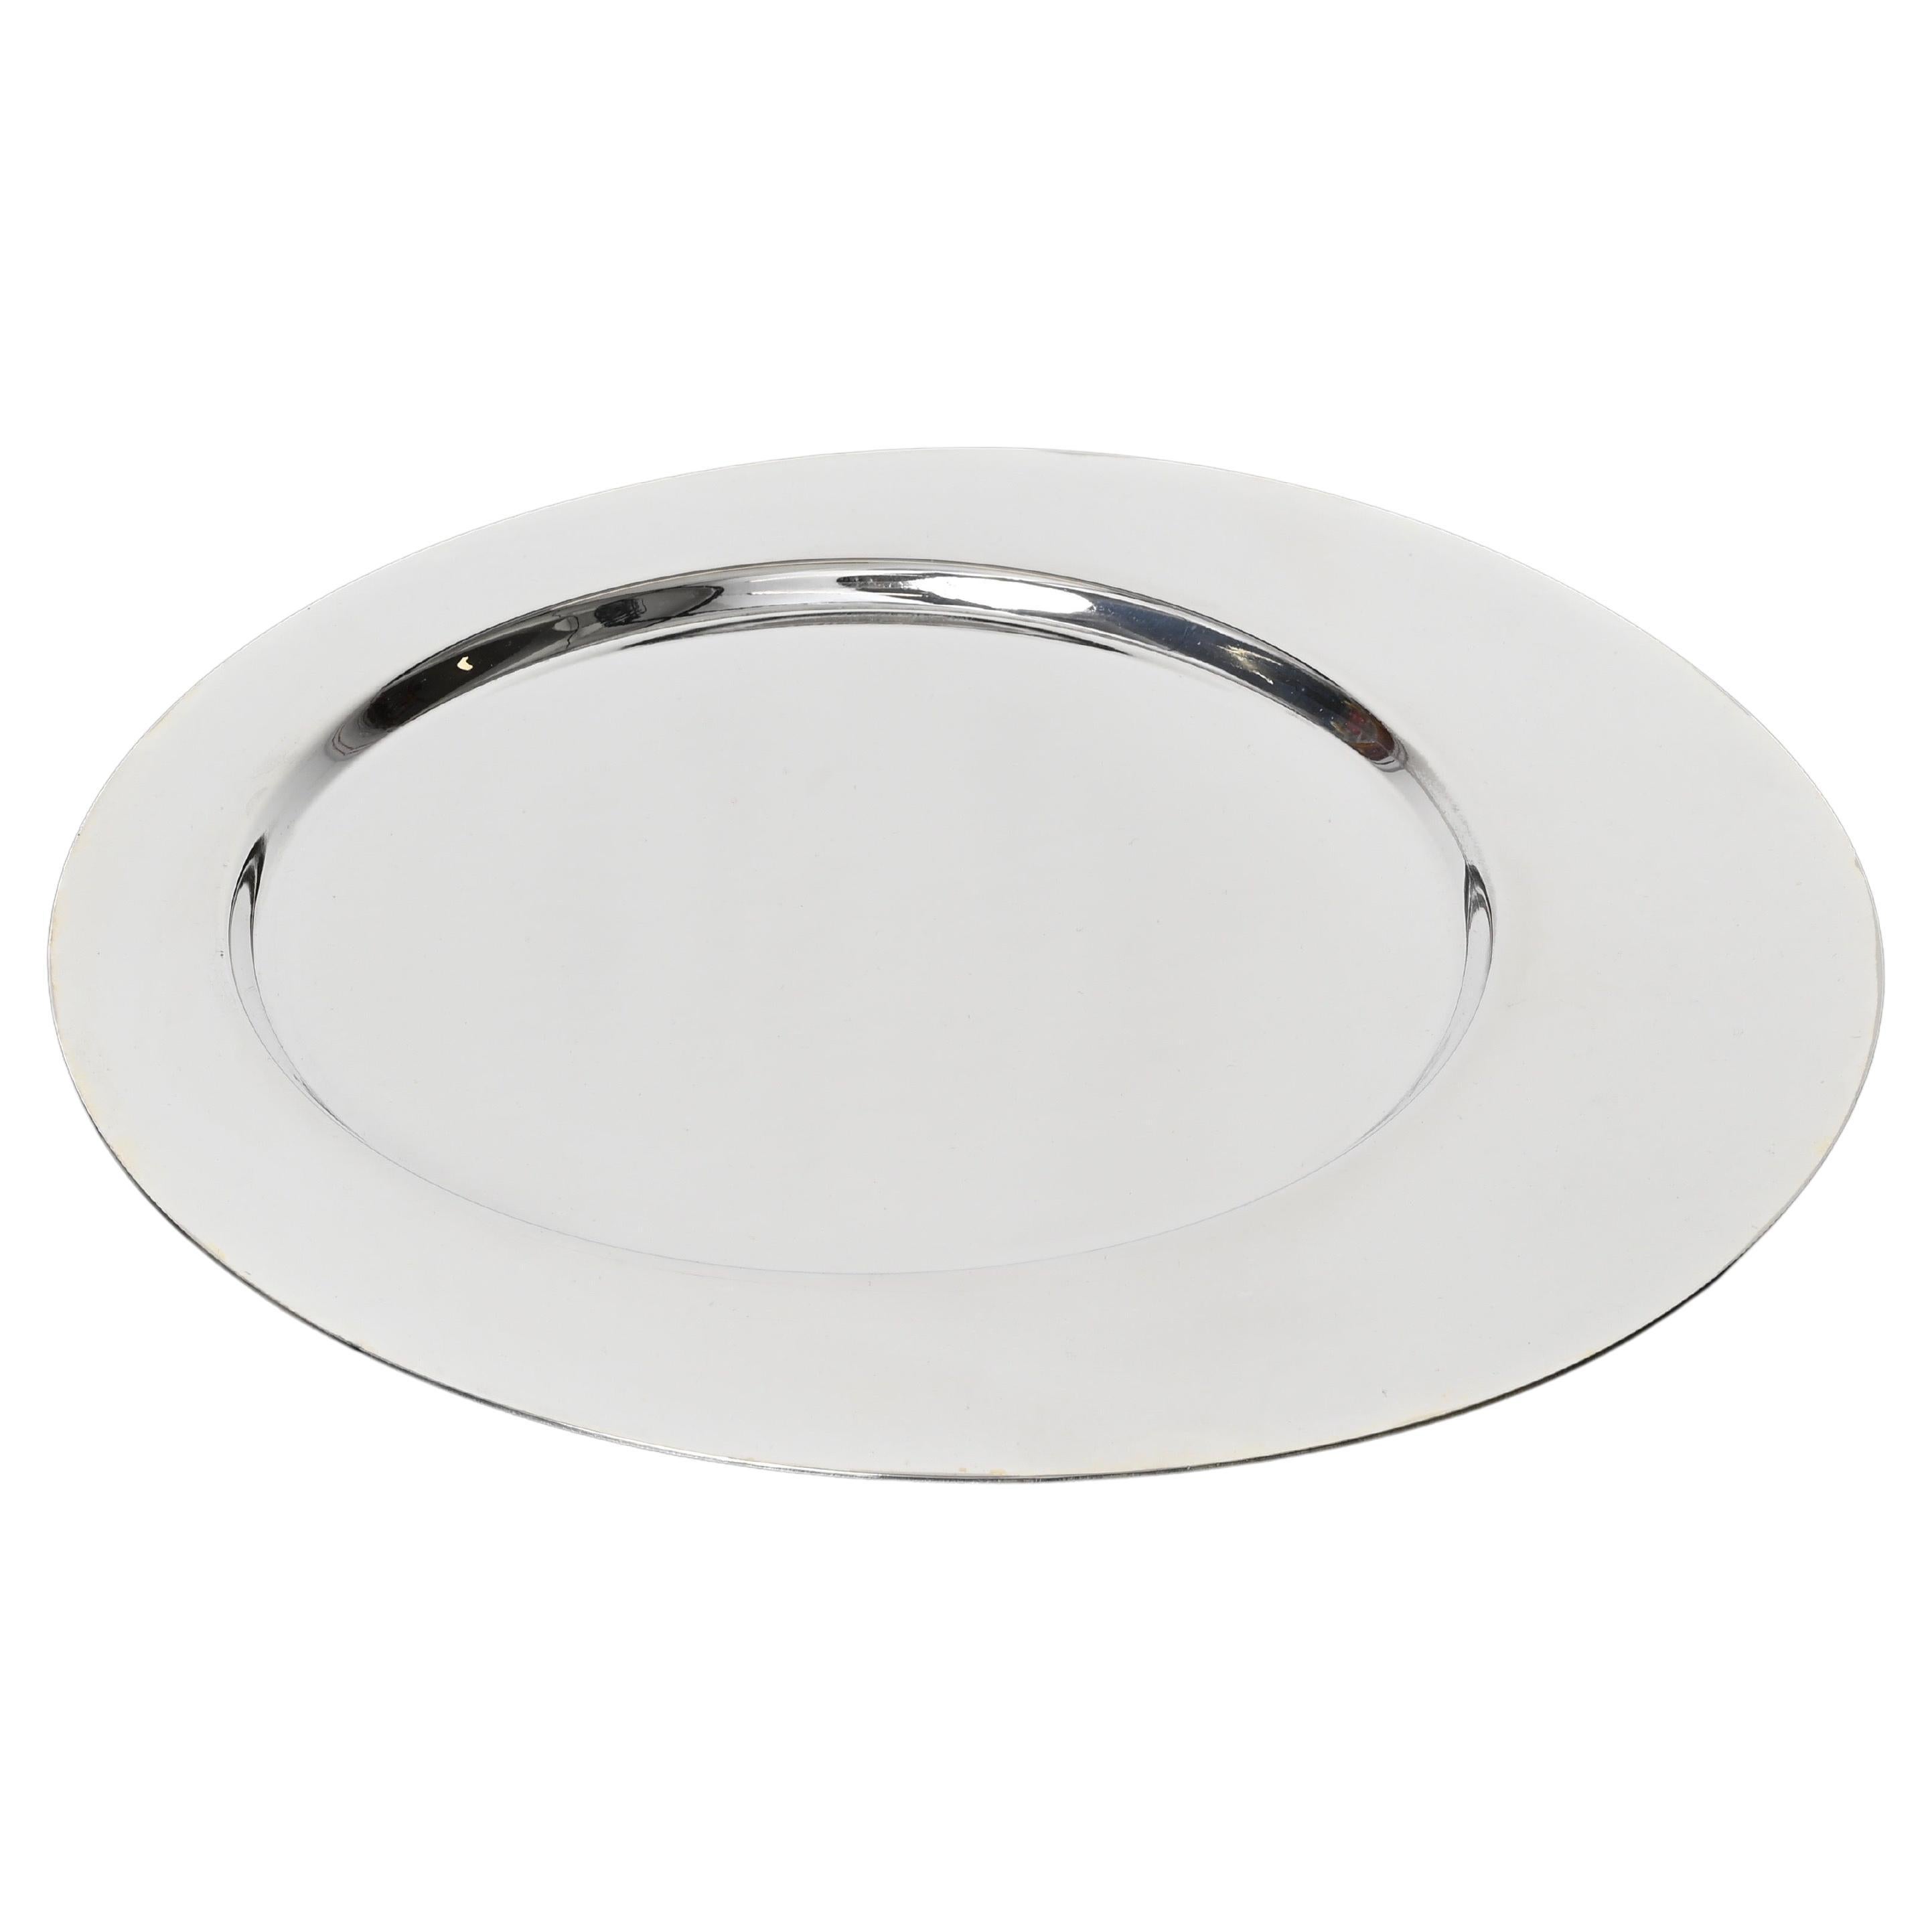 Gio Ponti for Cleto Munari Modernist Silver Plated Serving Plate Italy, 1980s For Sale 3